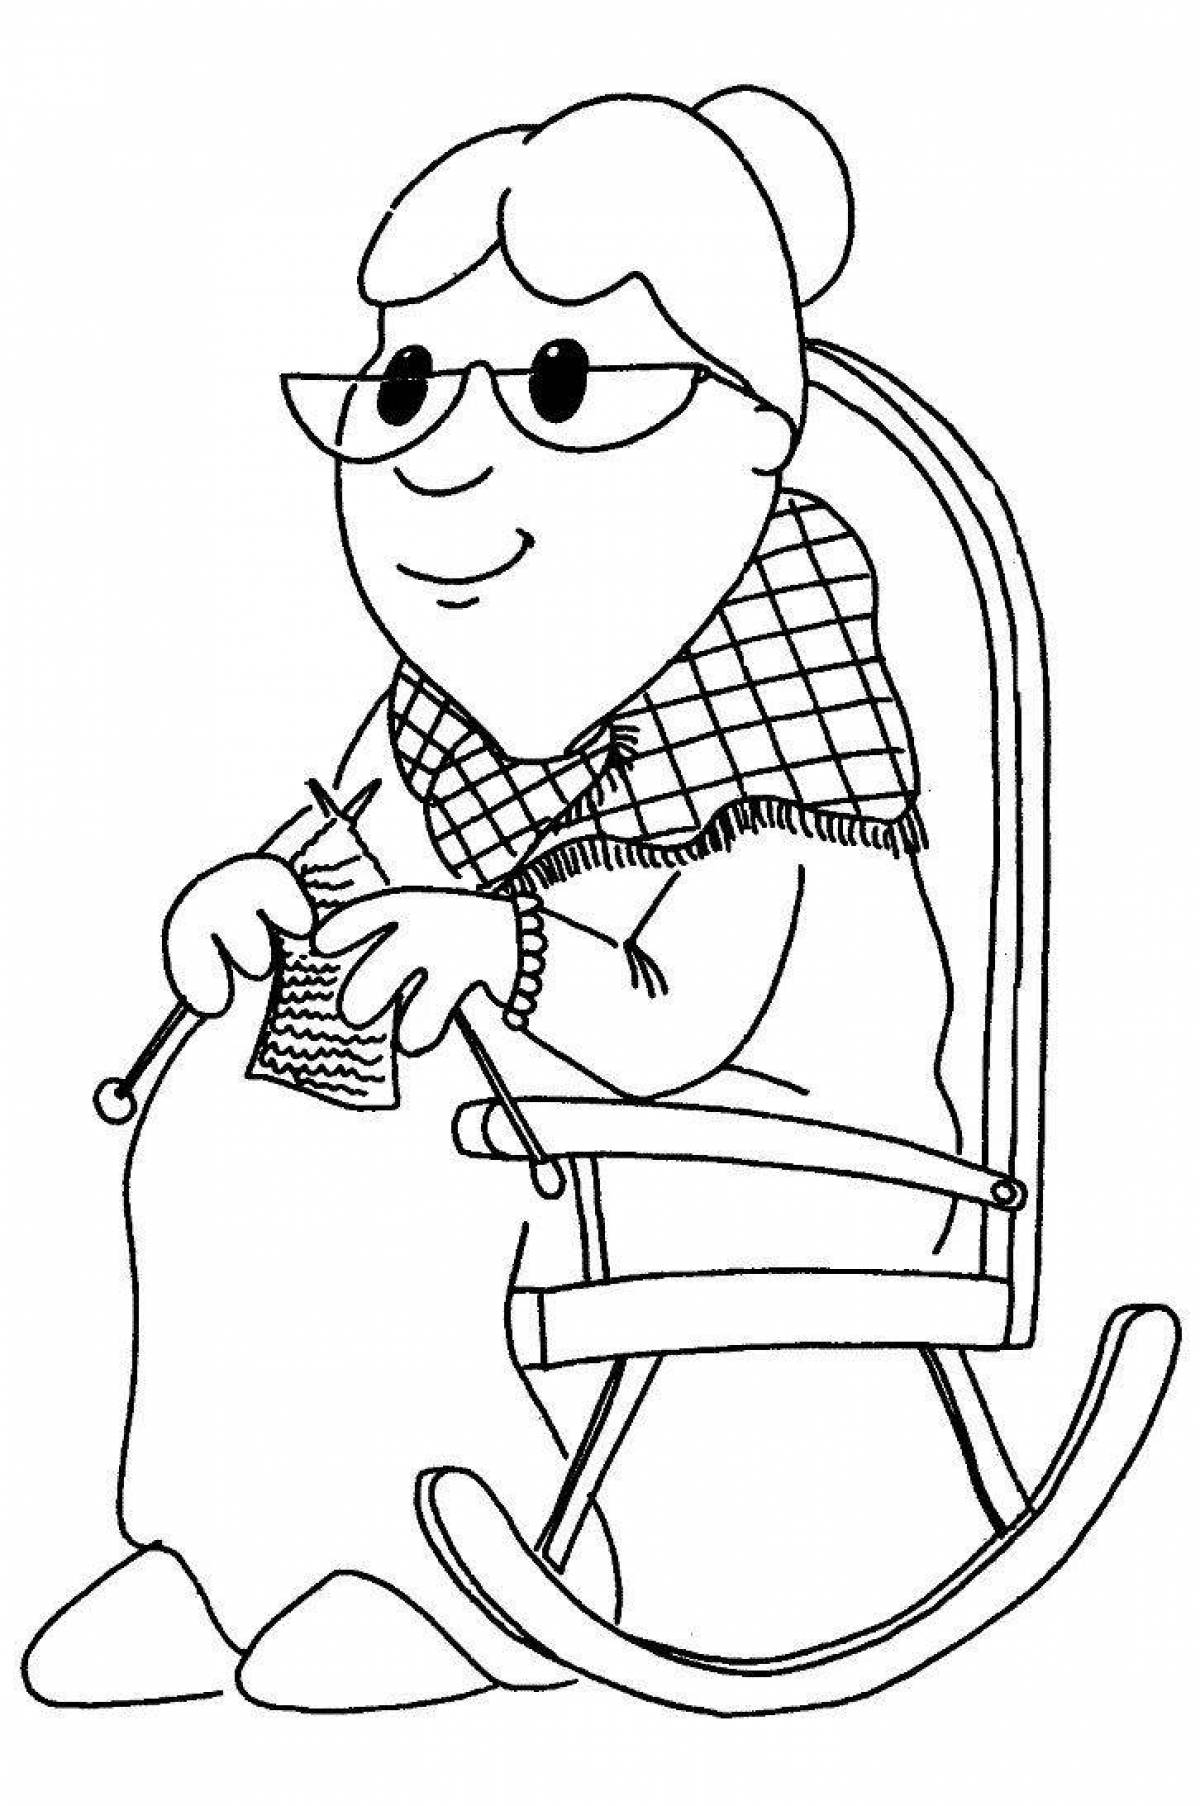 Grandmother's adorable coloring page